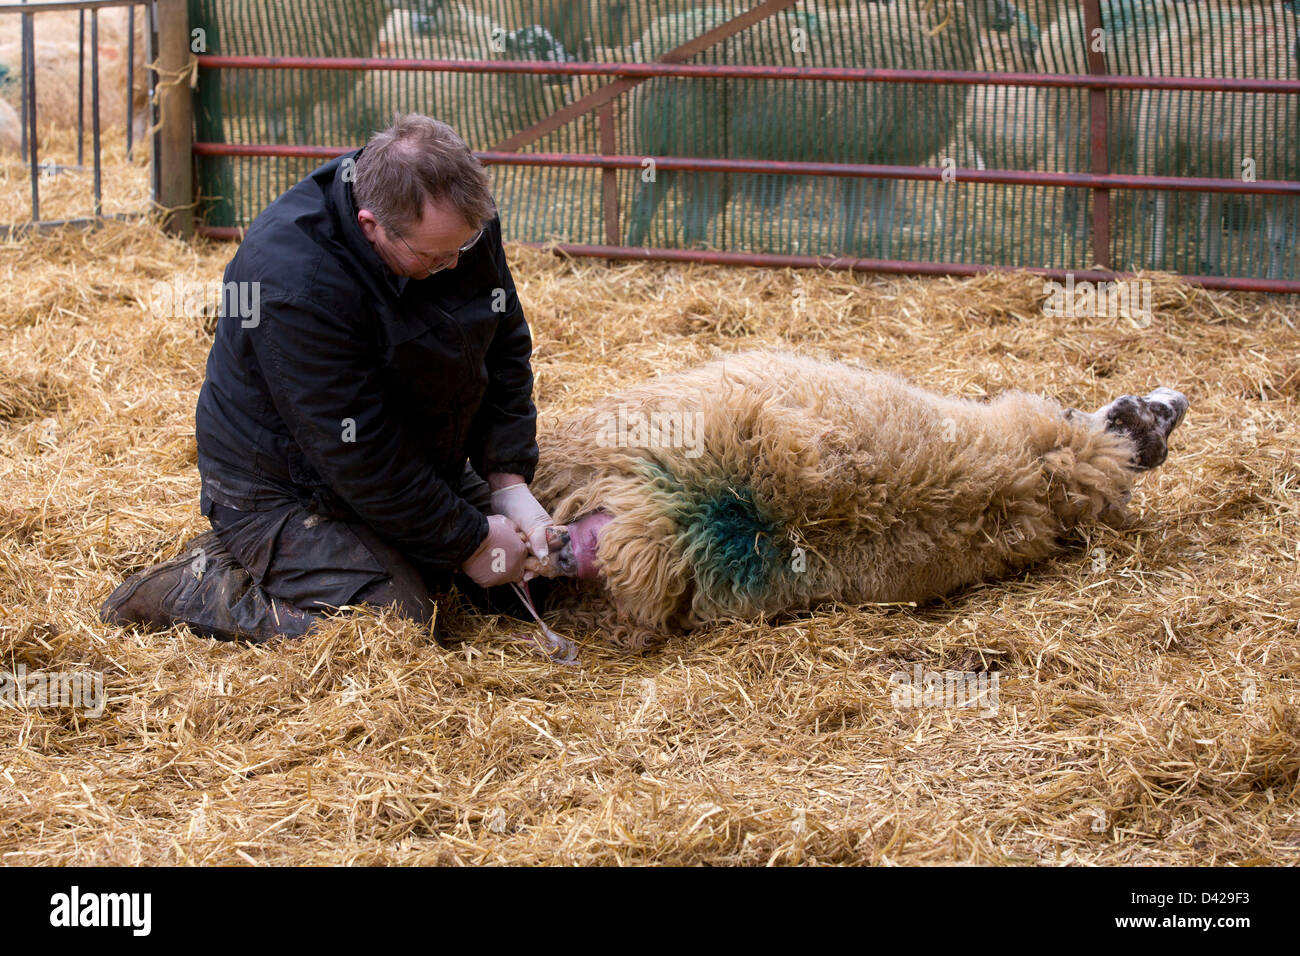 Glaston, Rutland, UK. March 2nd 2013. Spring has arrived at Coppice Farm, Glaston, as lambing the farms ewe's get's underway. Shepherd Danny Hurst helps a ewe to give birth. Credit: Tim Scrivener/Alamy Live News Stock Photo